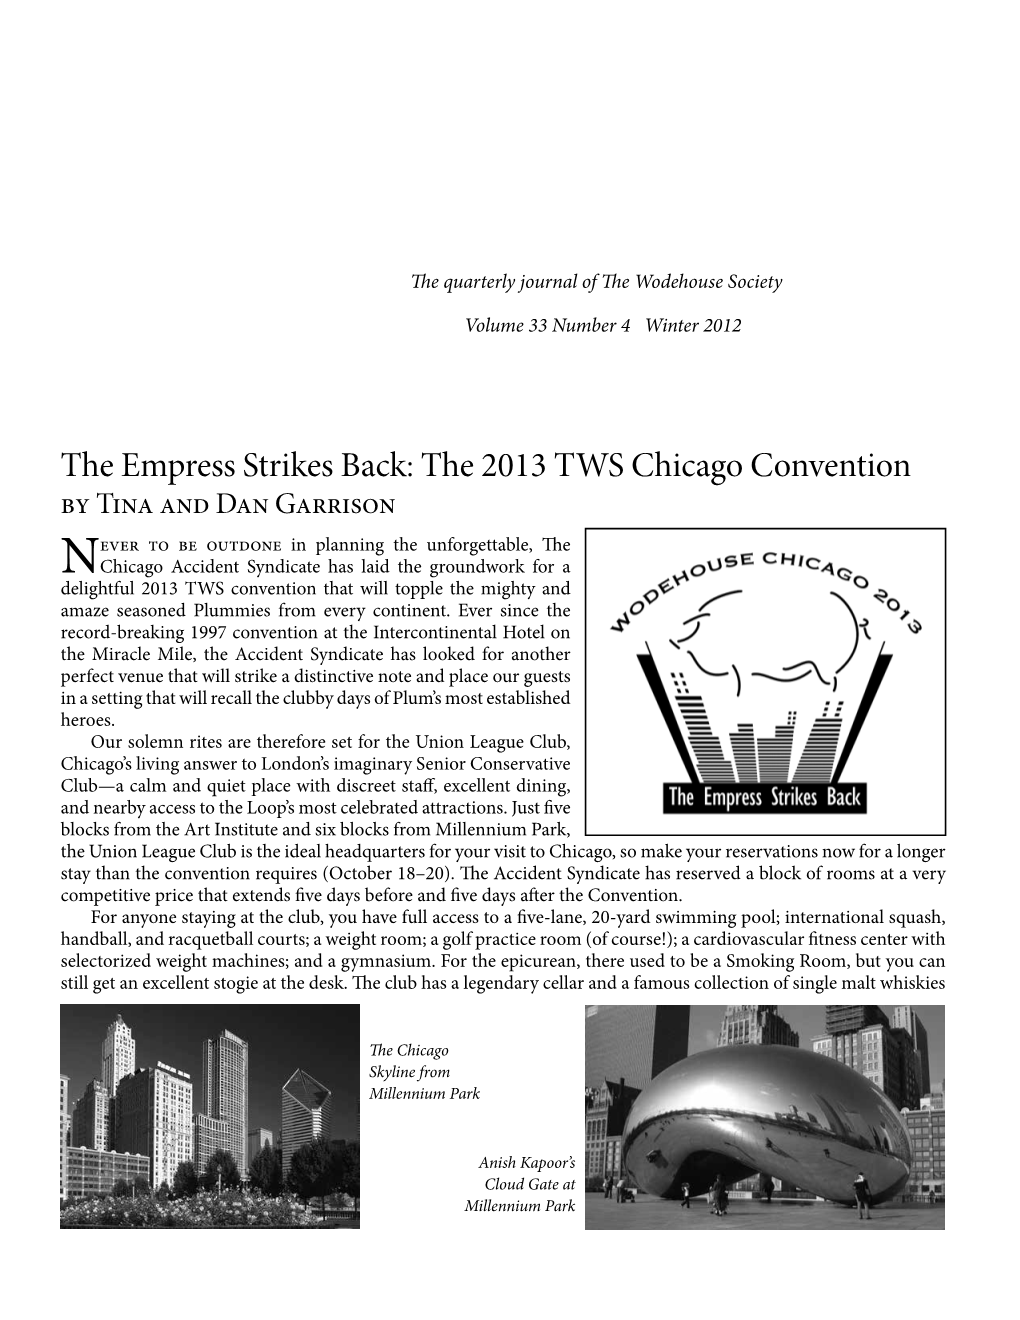 The Empress Strikes Back: the 2013 TWS Chicago Convention